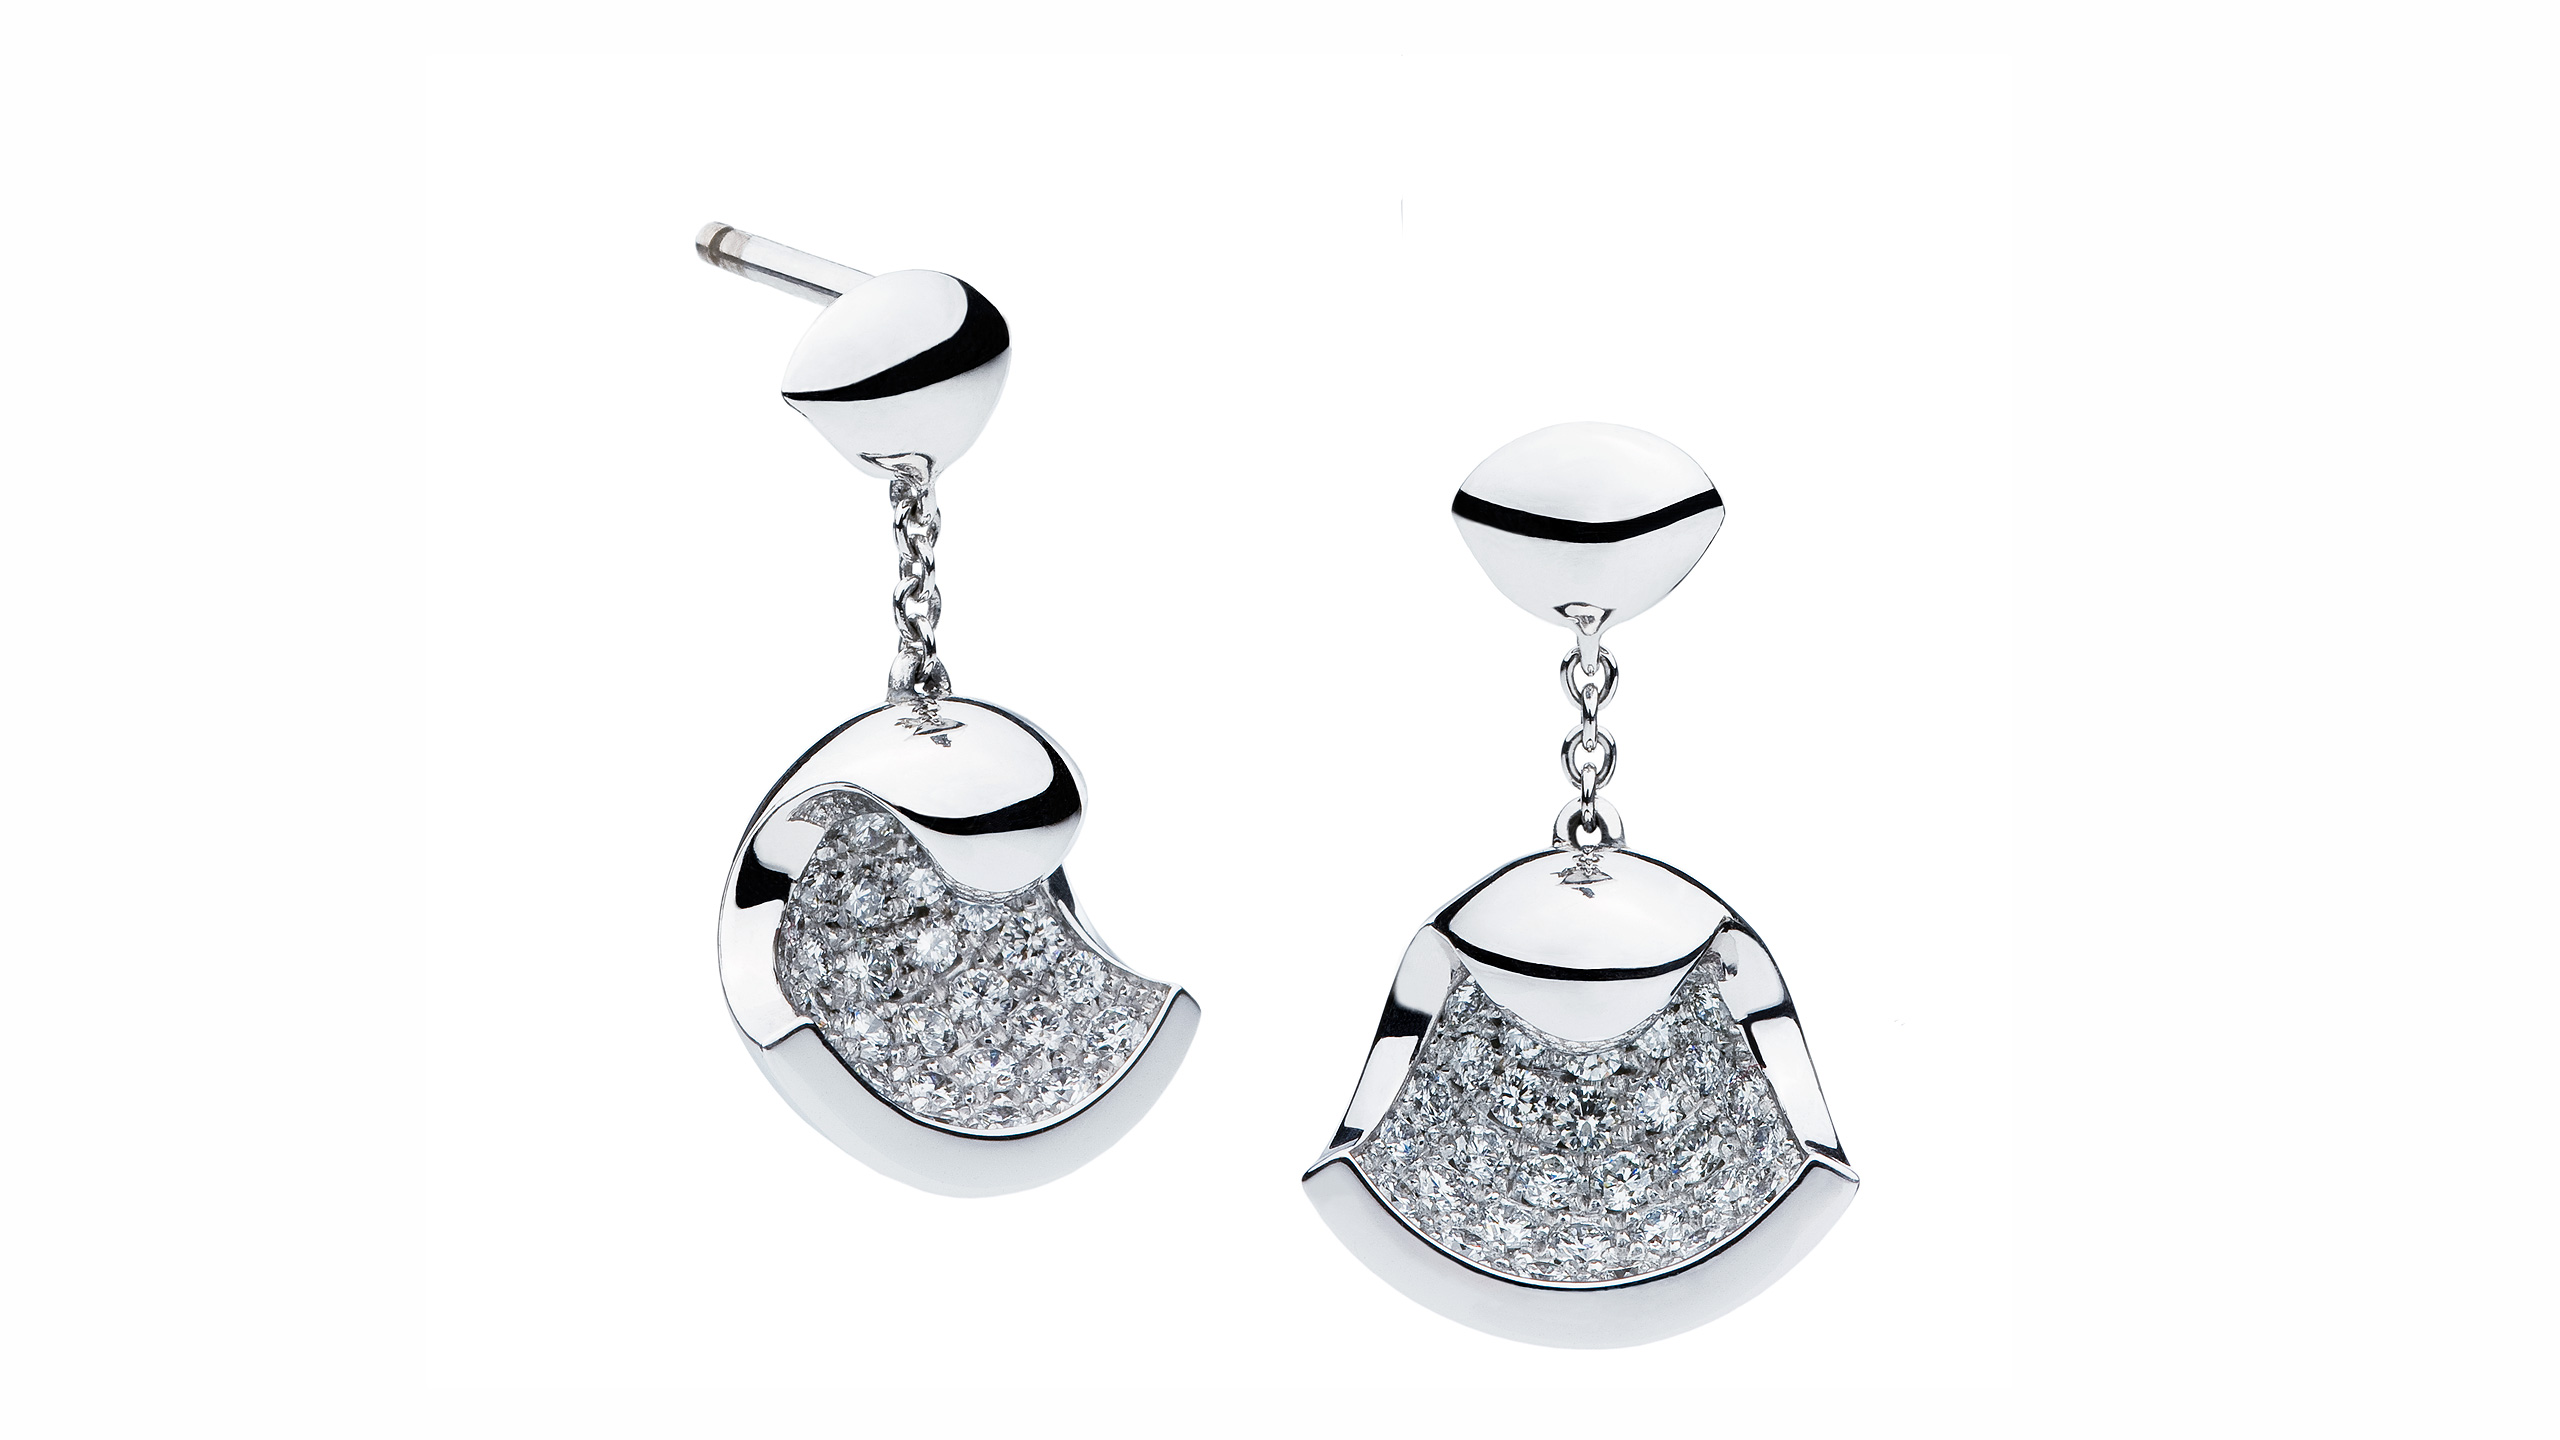 https://towejewels.com/wp-content/uploads/2012/08/Coquille_earrings_pair_20110322_0010_OK_2560x1440_overview_Web.jpg